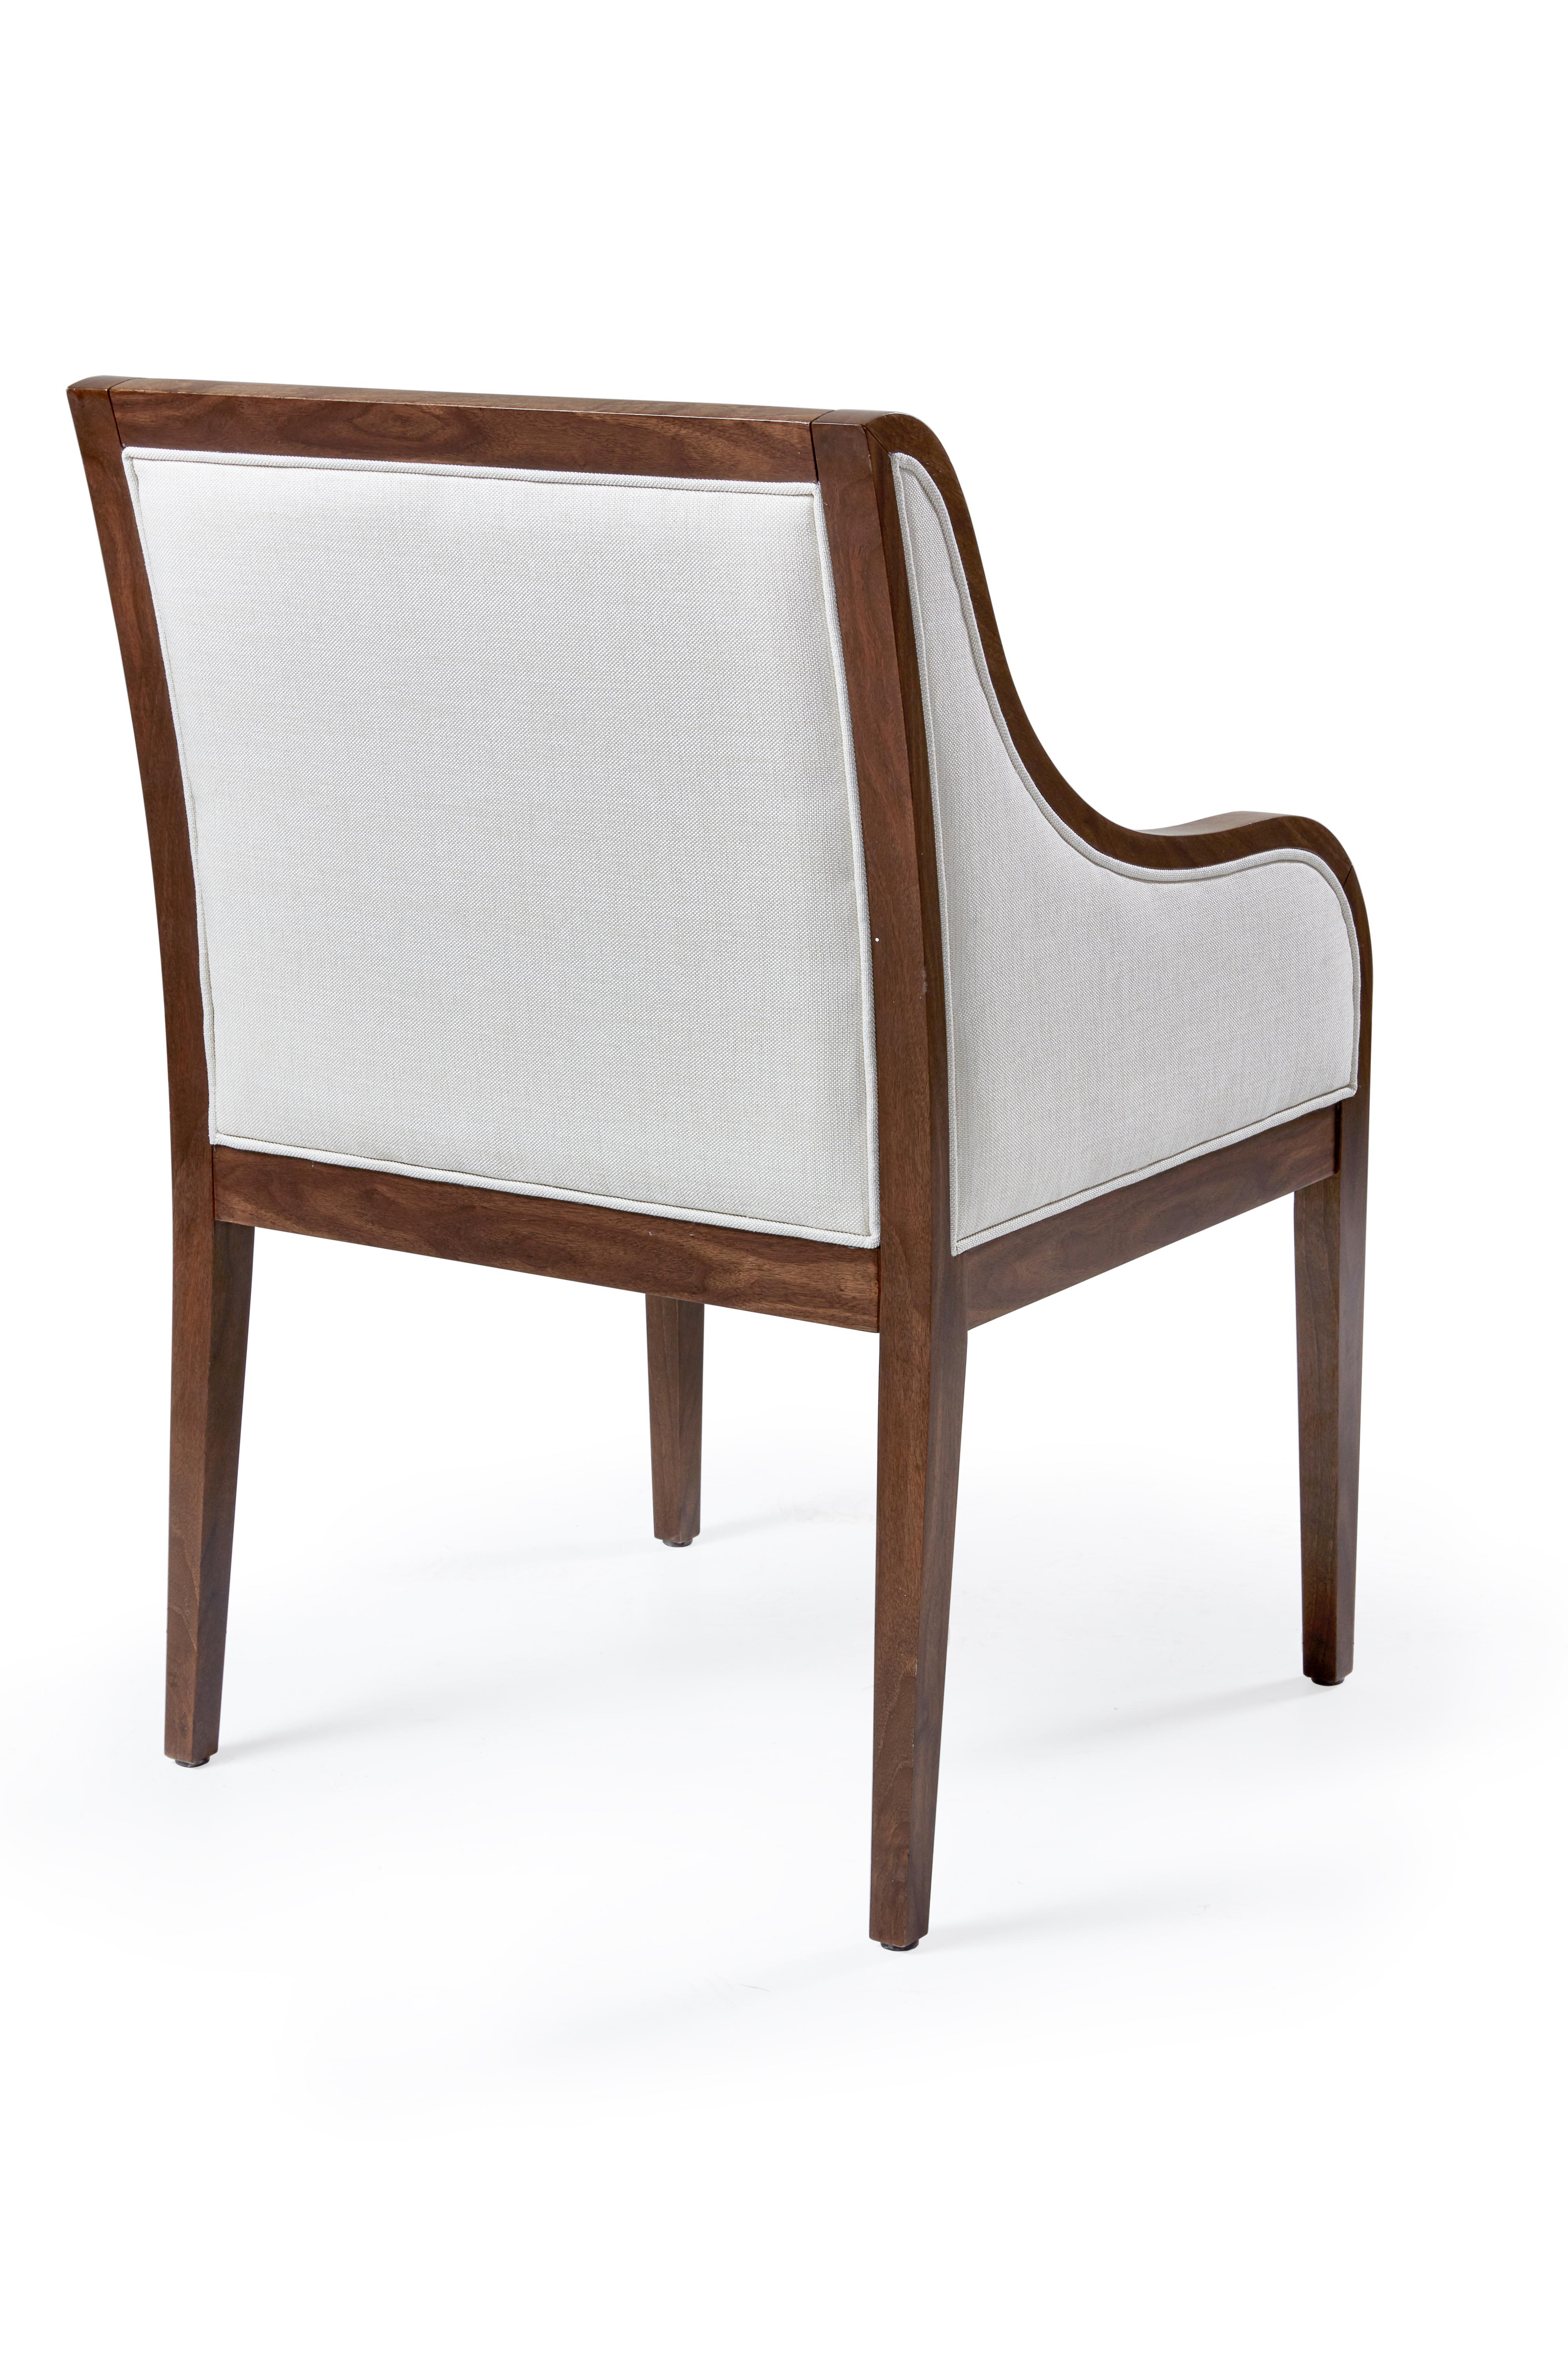 This well proportioned, deep seated chair has the perfect curved arms to assure comfort through long dinner parties or even at a desk. Fully upholstered and framed in wood, the elegant lines allow this chair to dress up any space.